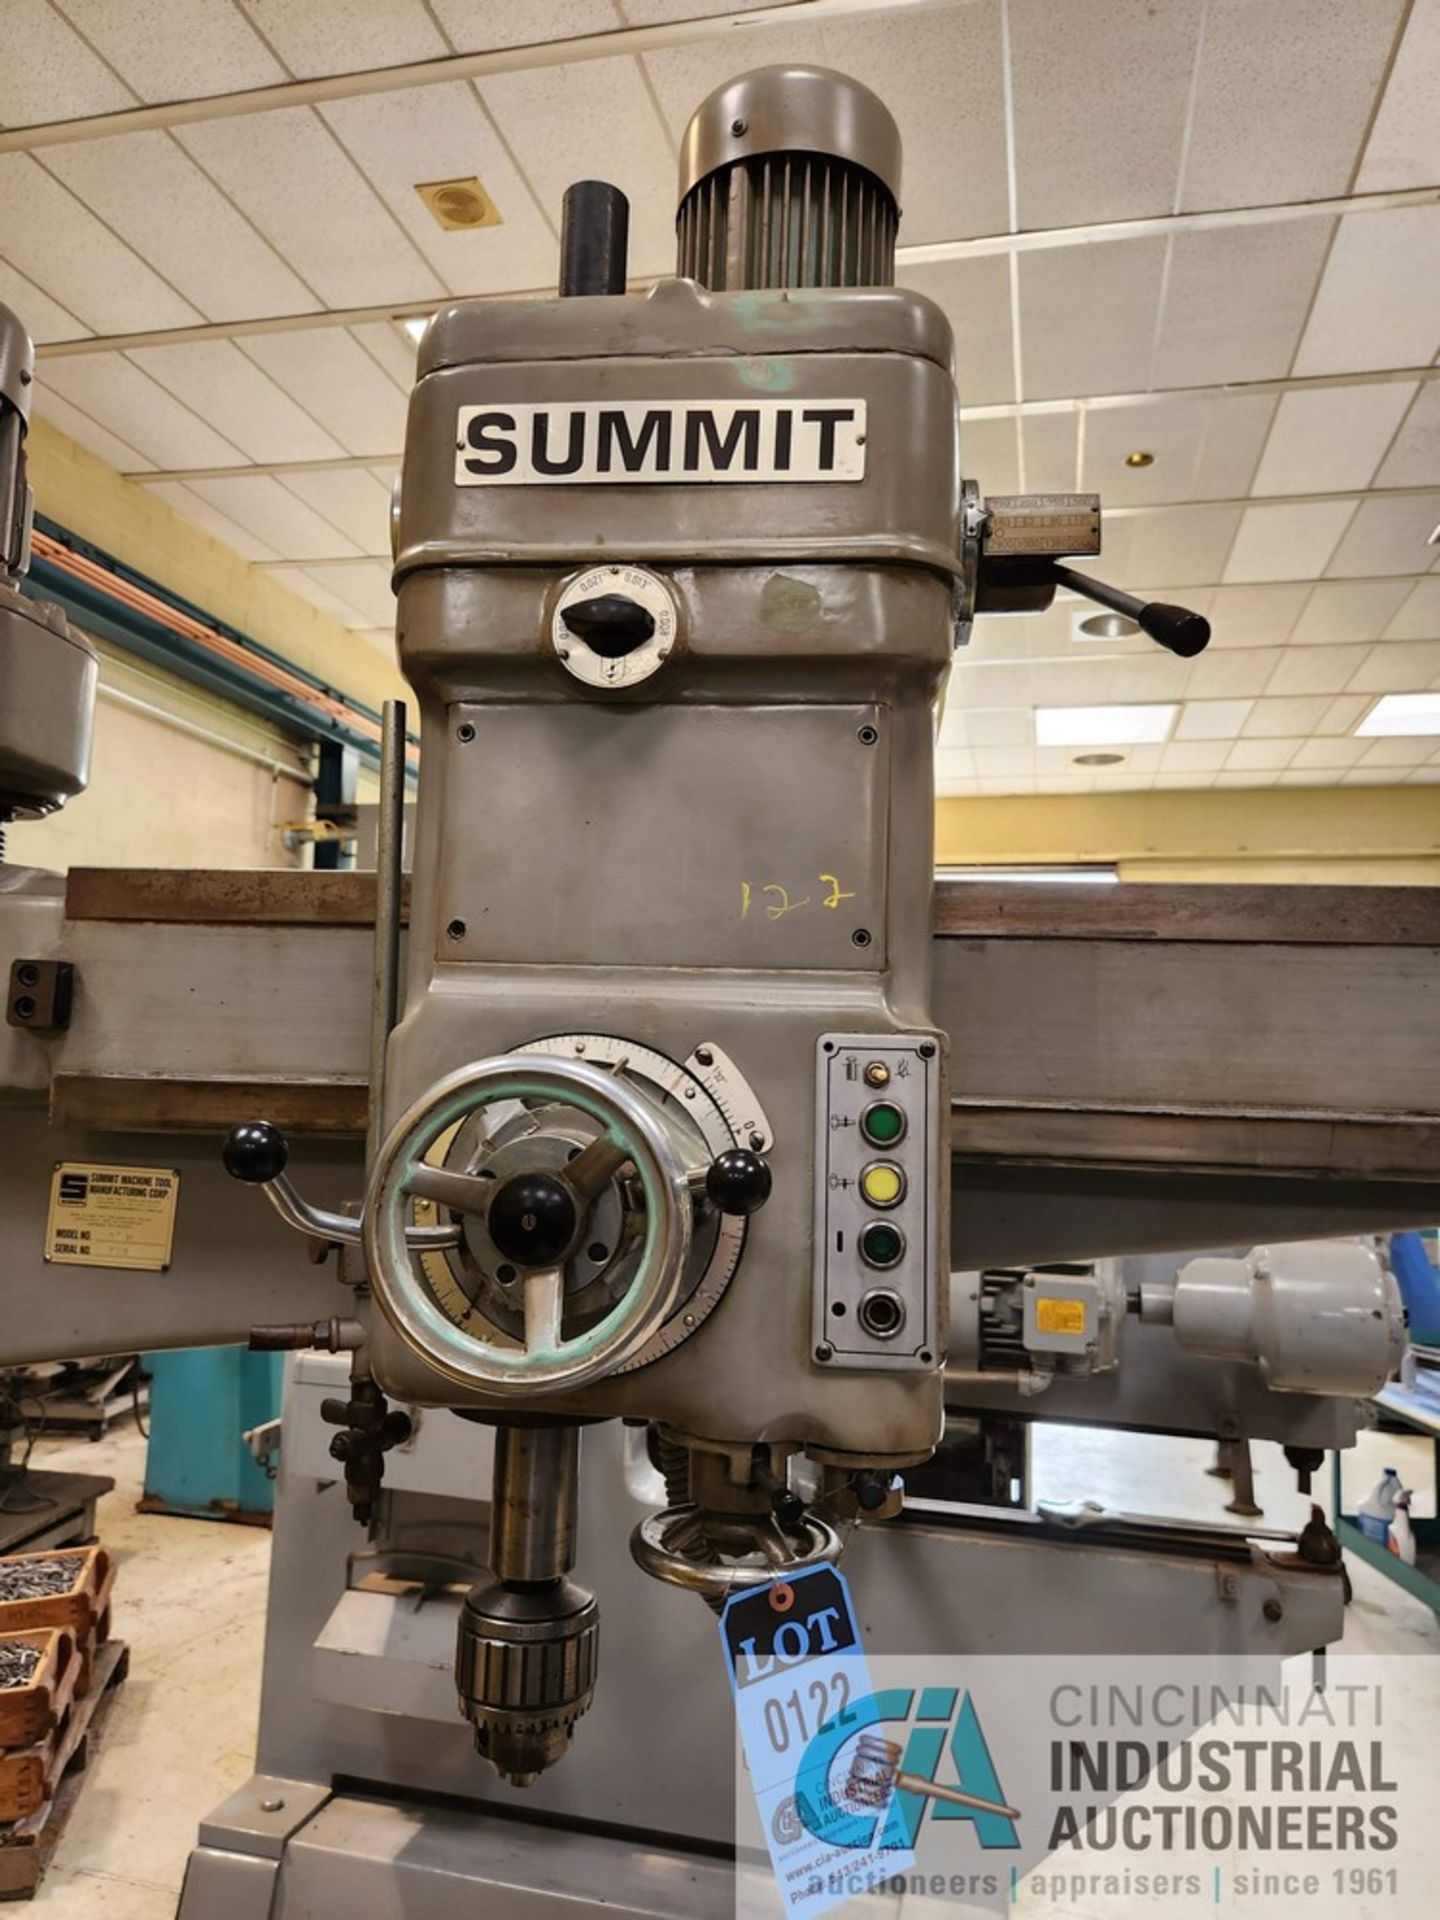 9" COLUMN X 48" ARM SUMMIT MODEL 3H RADIAL ARM DRILL; S/N 783, 18" X 18" DRILL TABLE & 6" VISE - Image 4 of 7